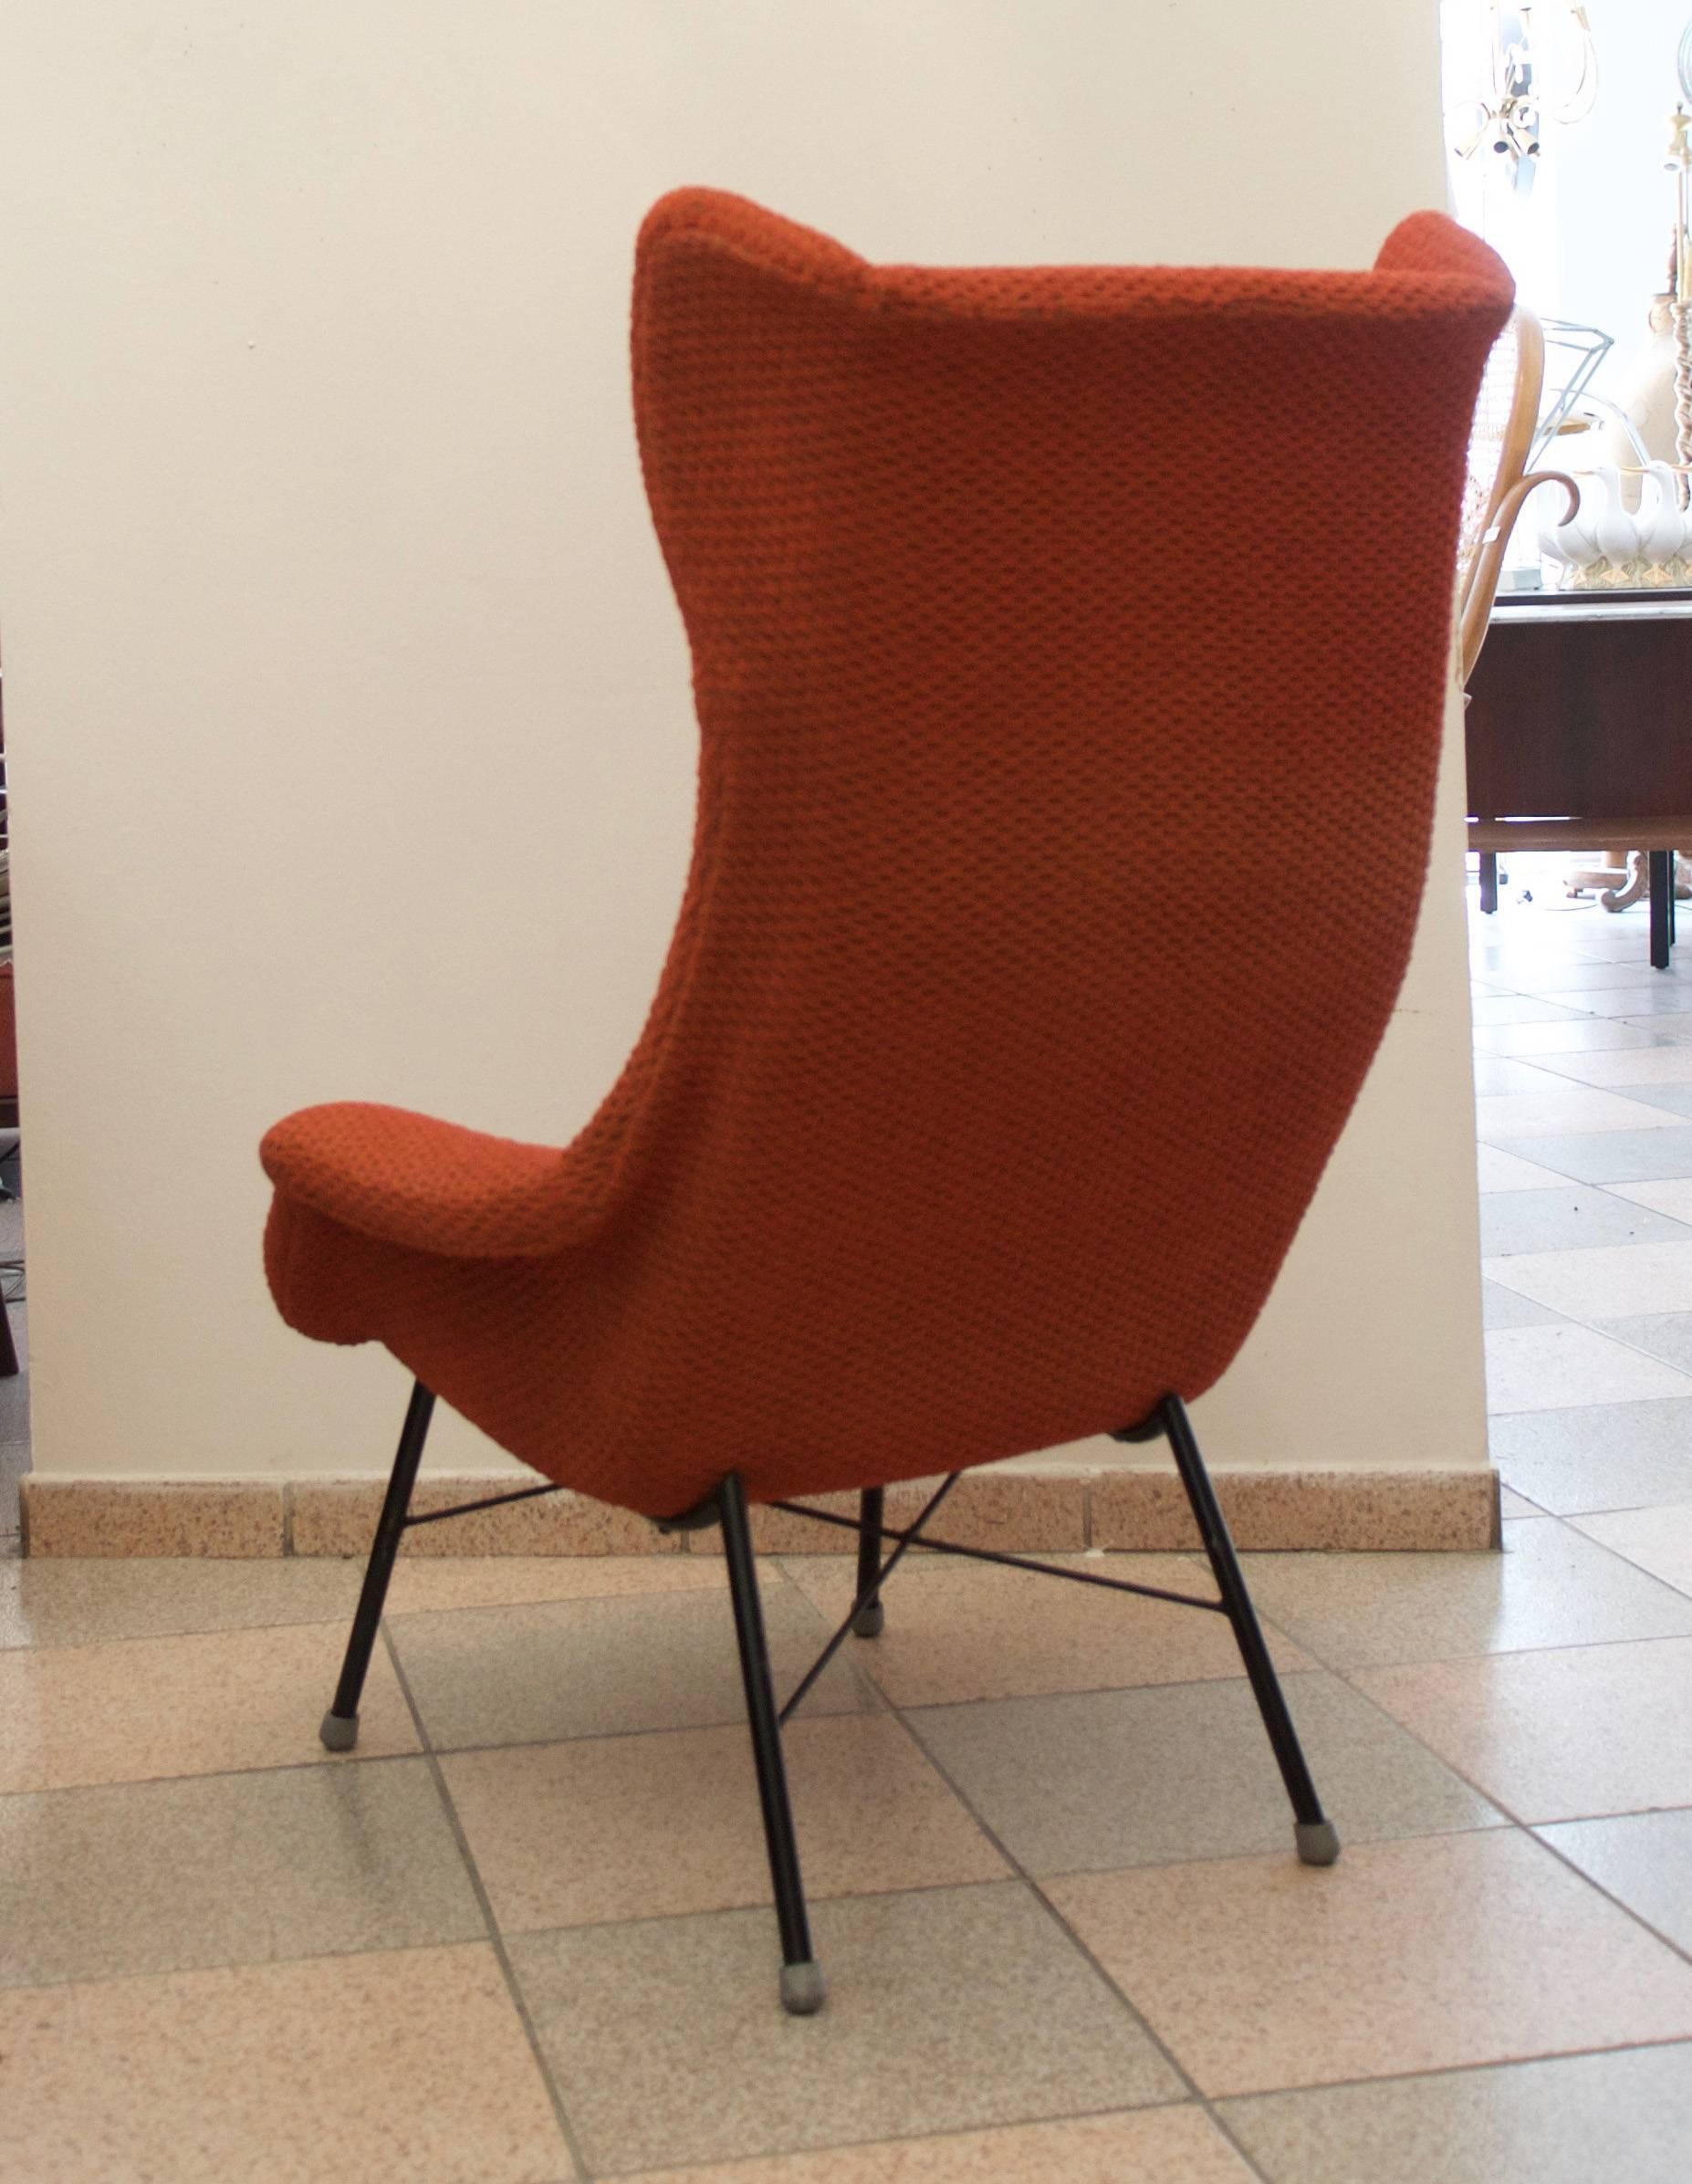 Wingback chair on steel legs designed by Miroslav Navratil for TON (formerly Thonet) in the 1960s. 
Really perfect original condition with stril original fabric.